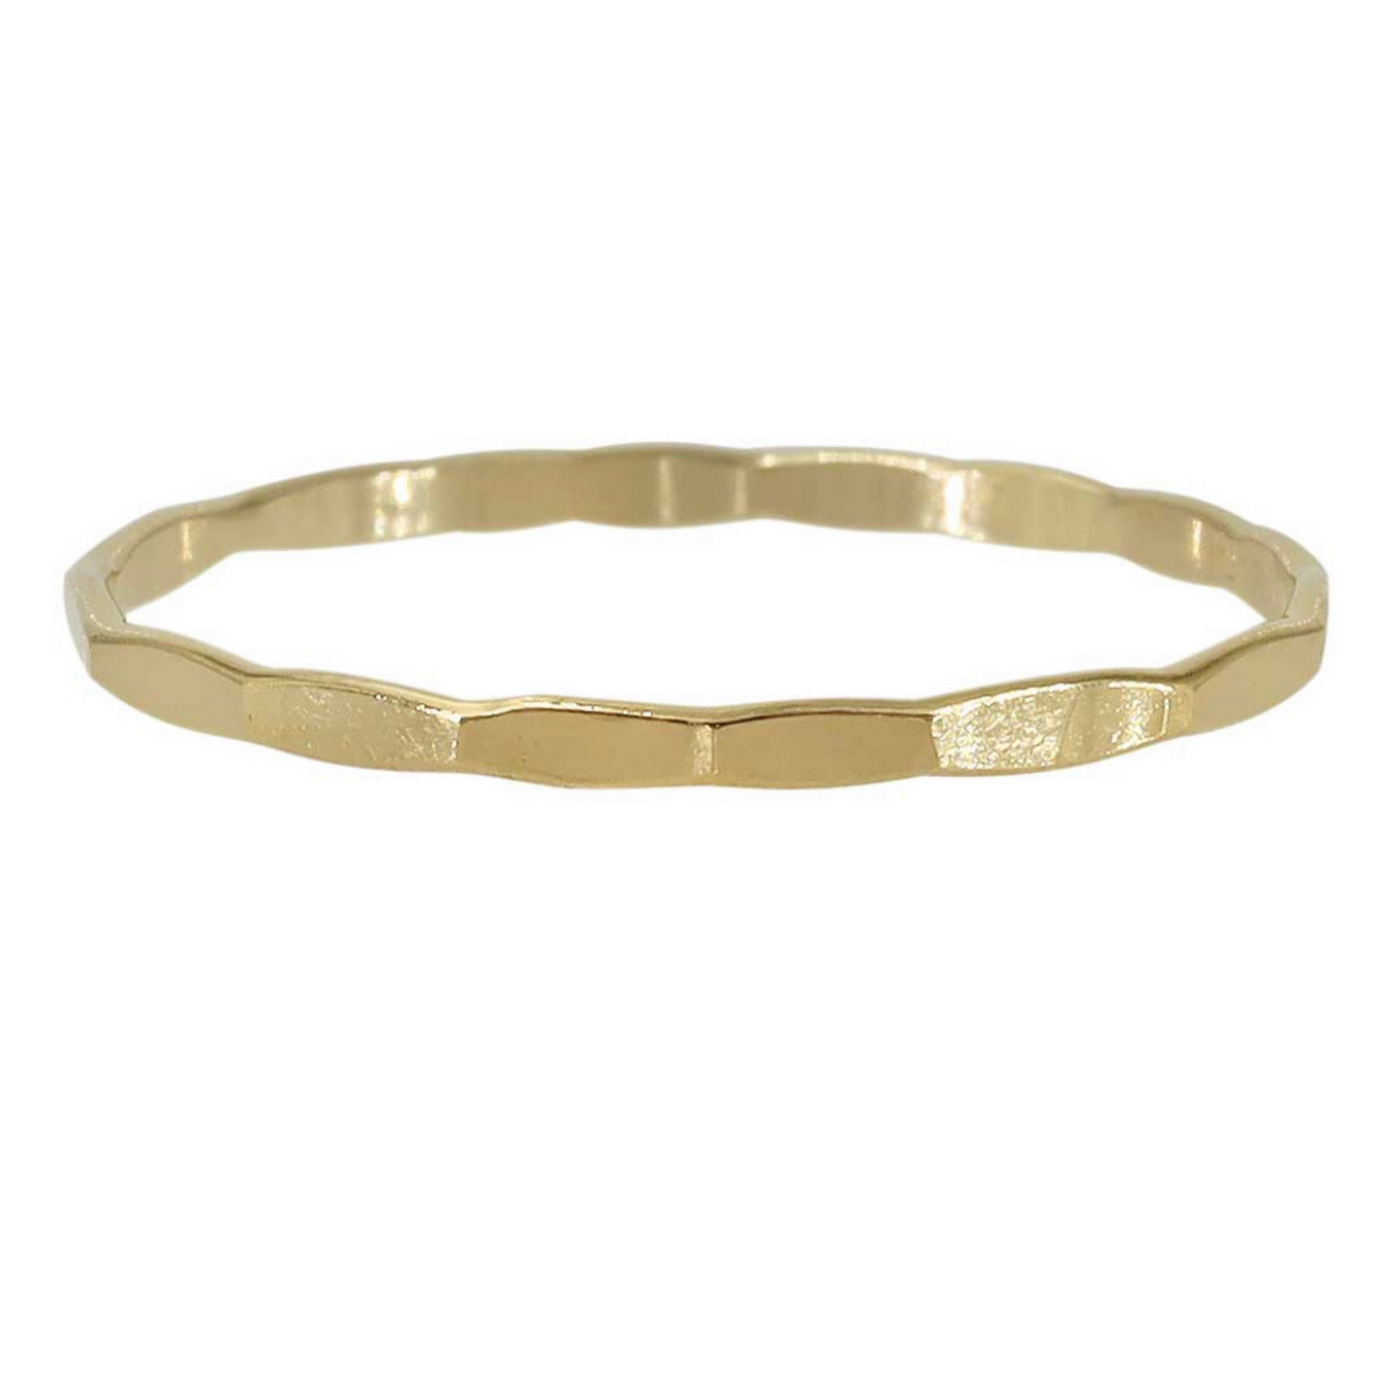 14K gold filled 1mm thick  ring band that has been hammered to give a faceted appearance. Light reflects beautifully off of the angles.